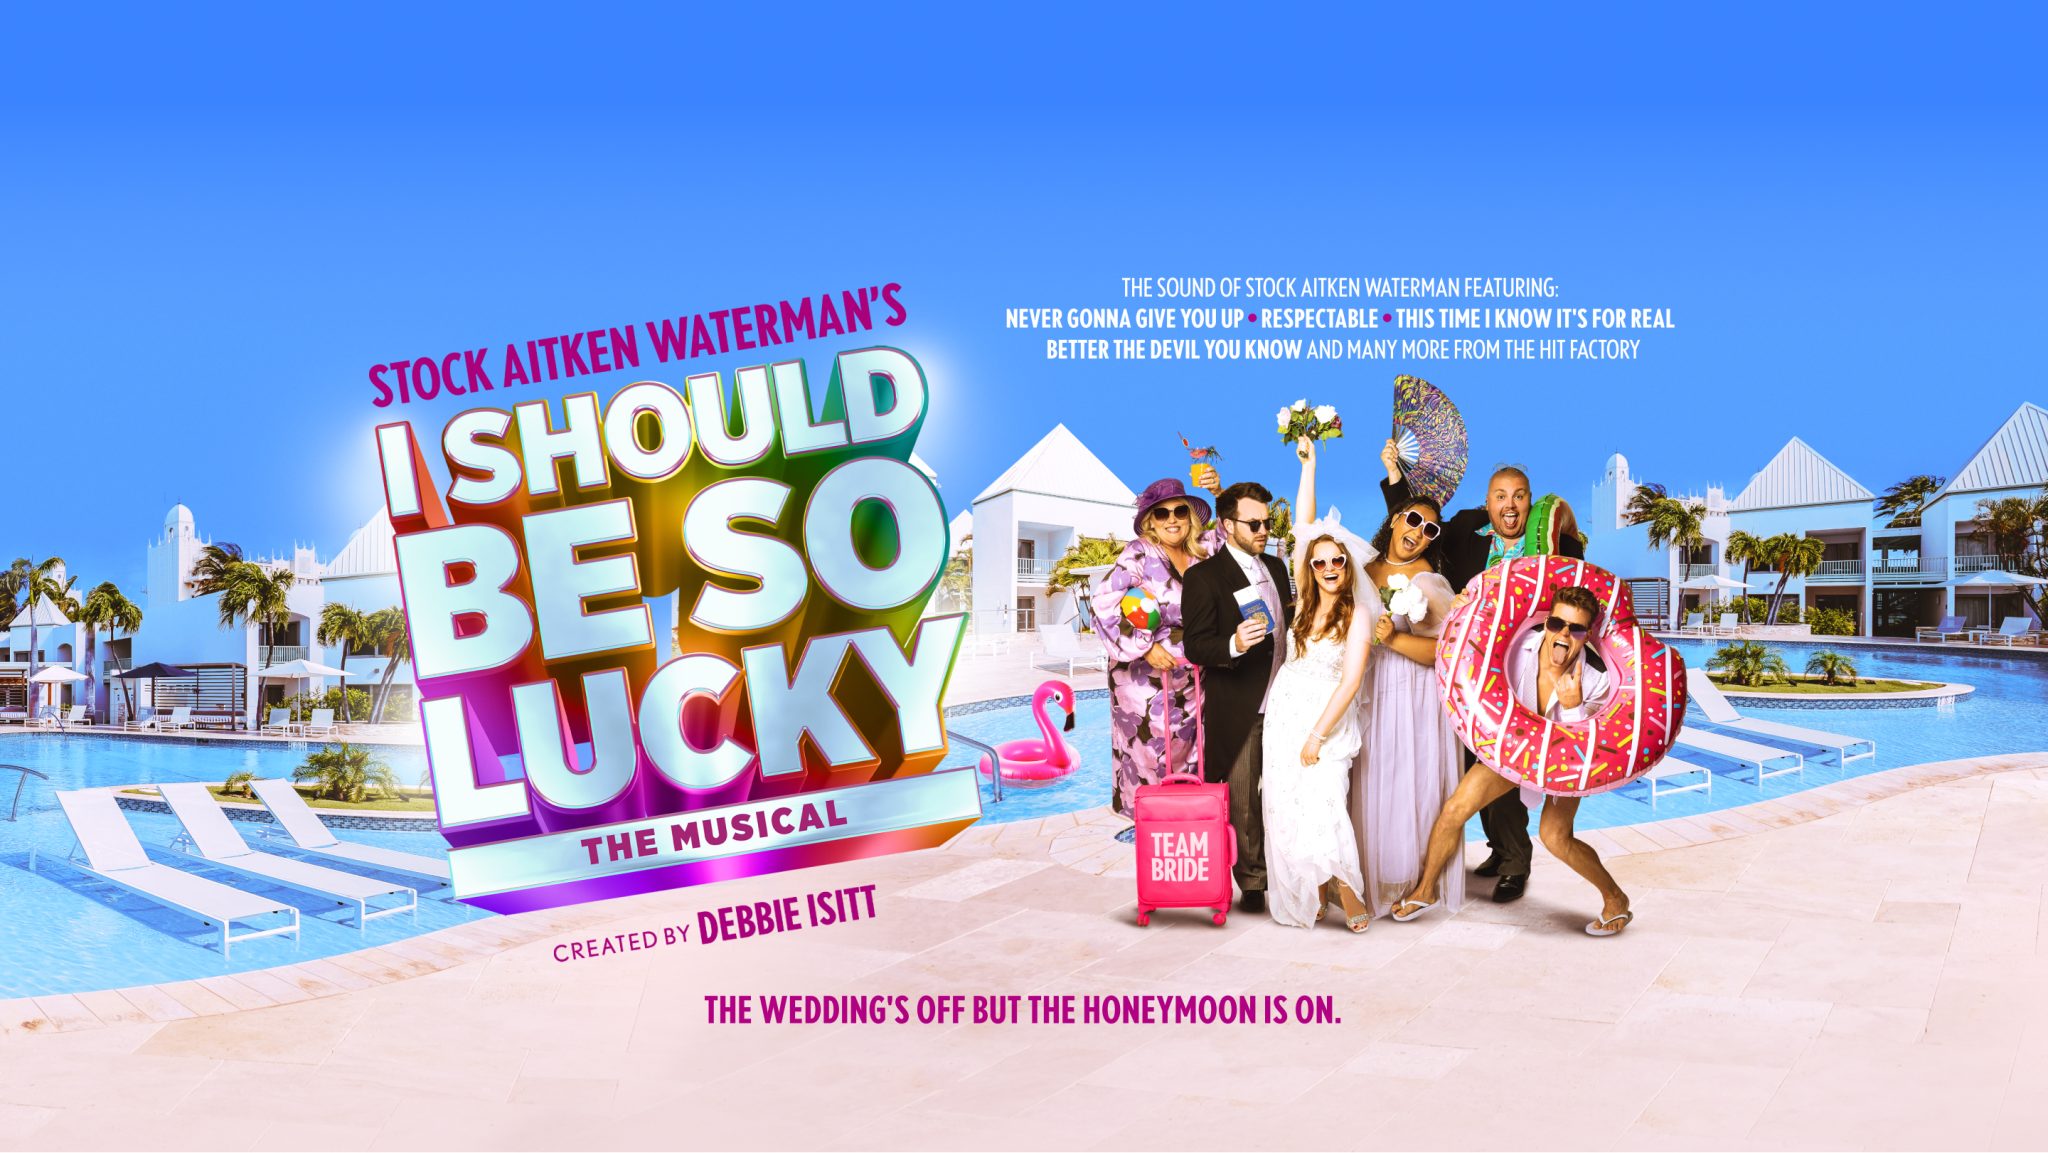 I Should Be So Lucky poster ad